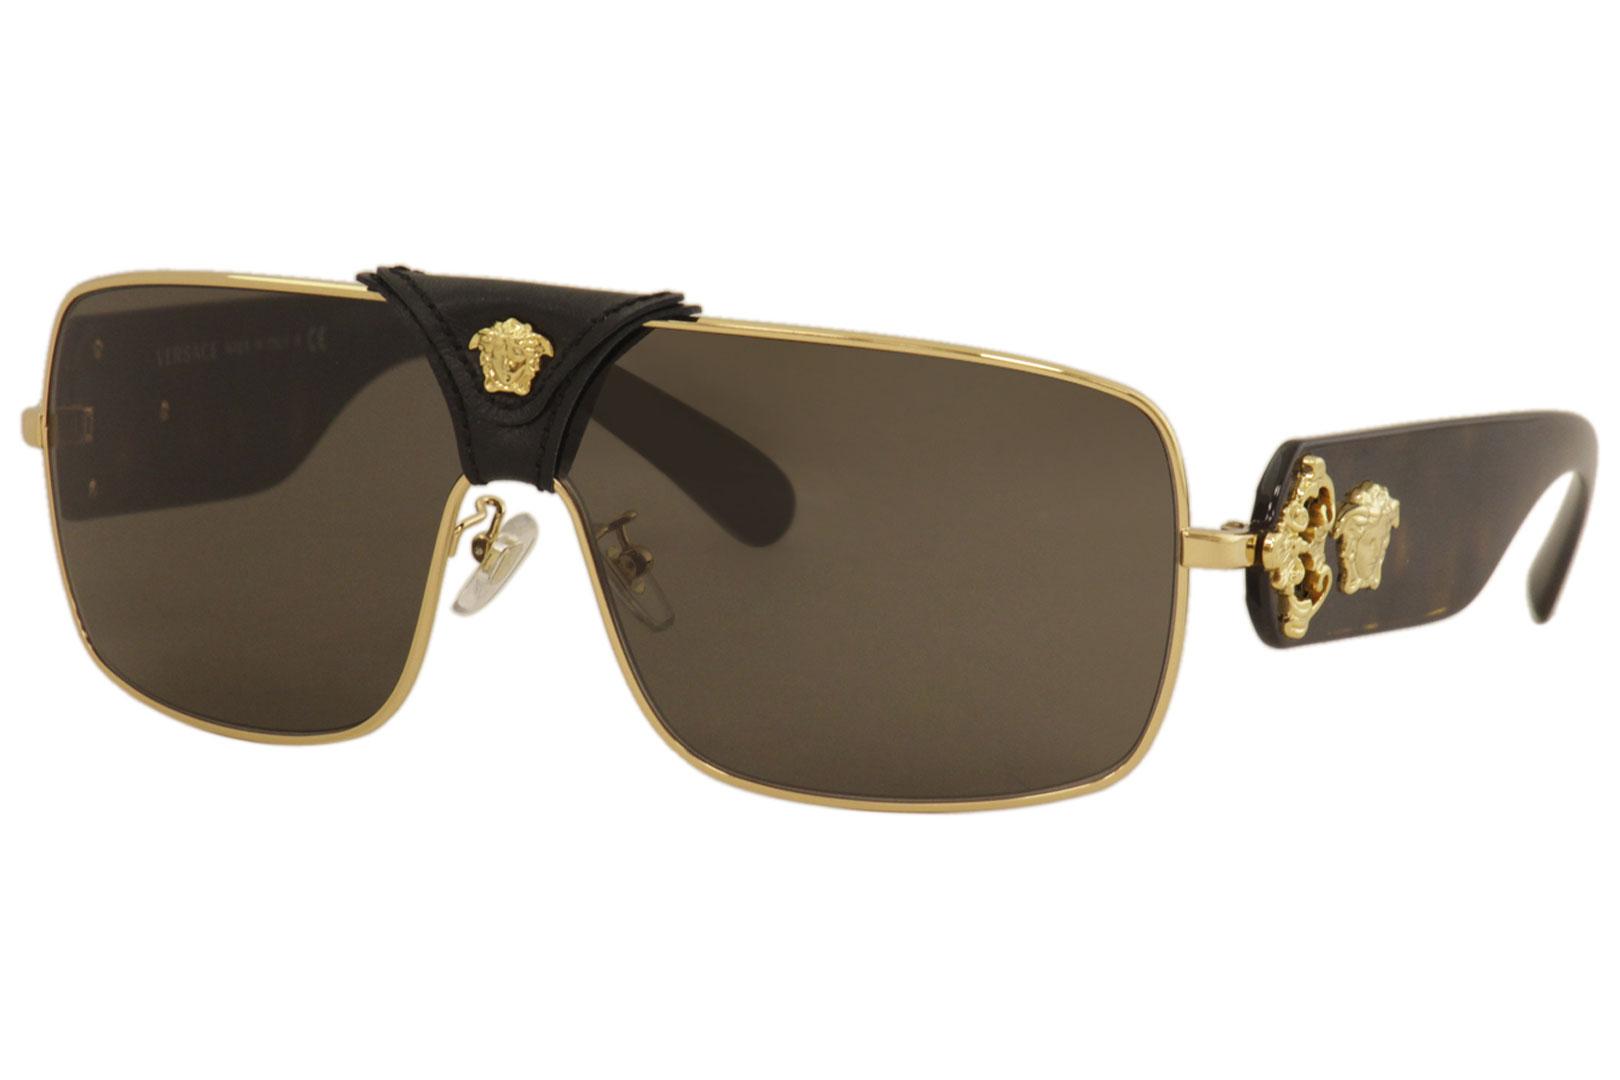 versace aviator sunglasses with removable leather medusa